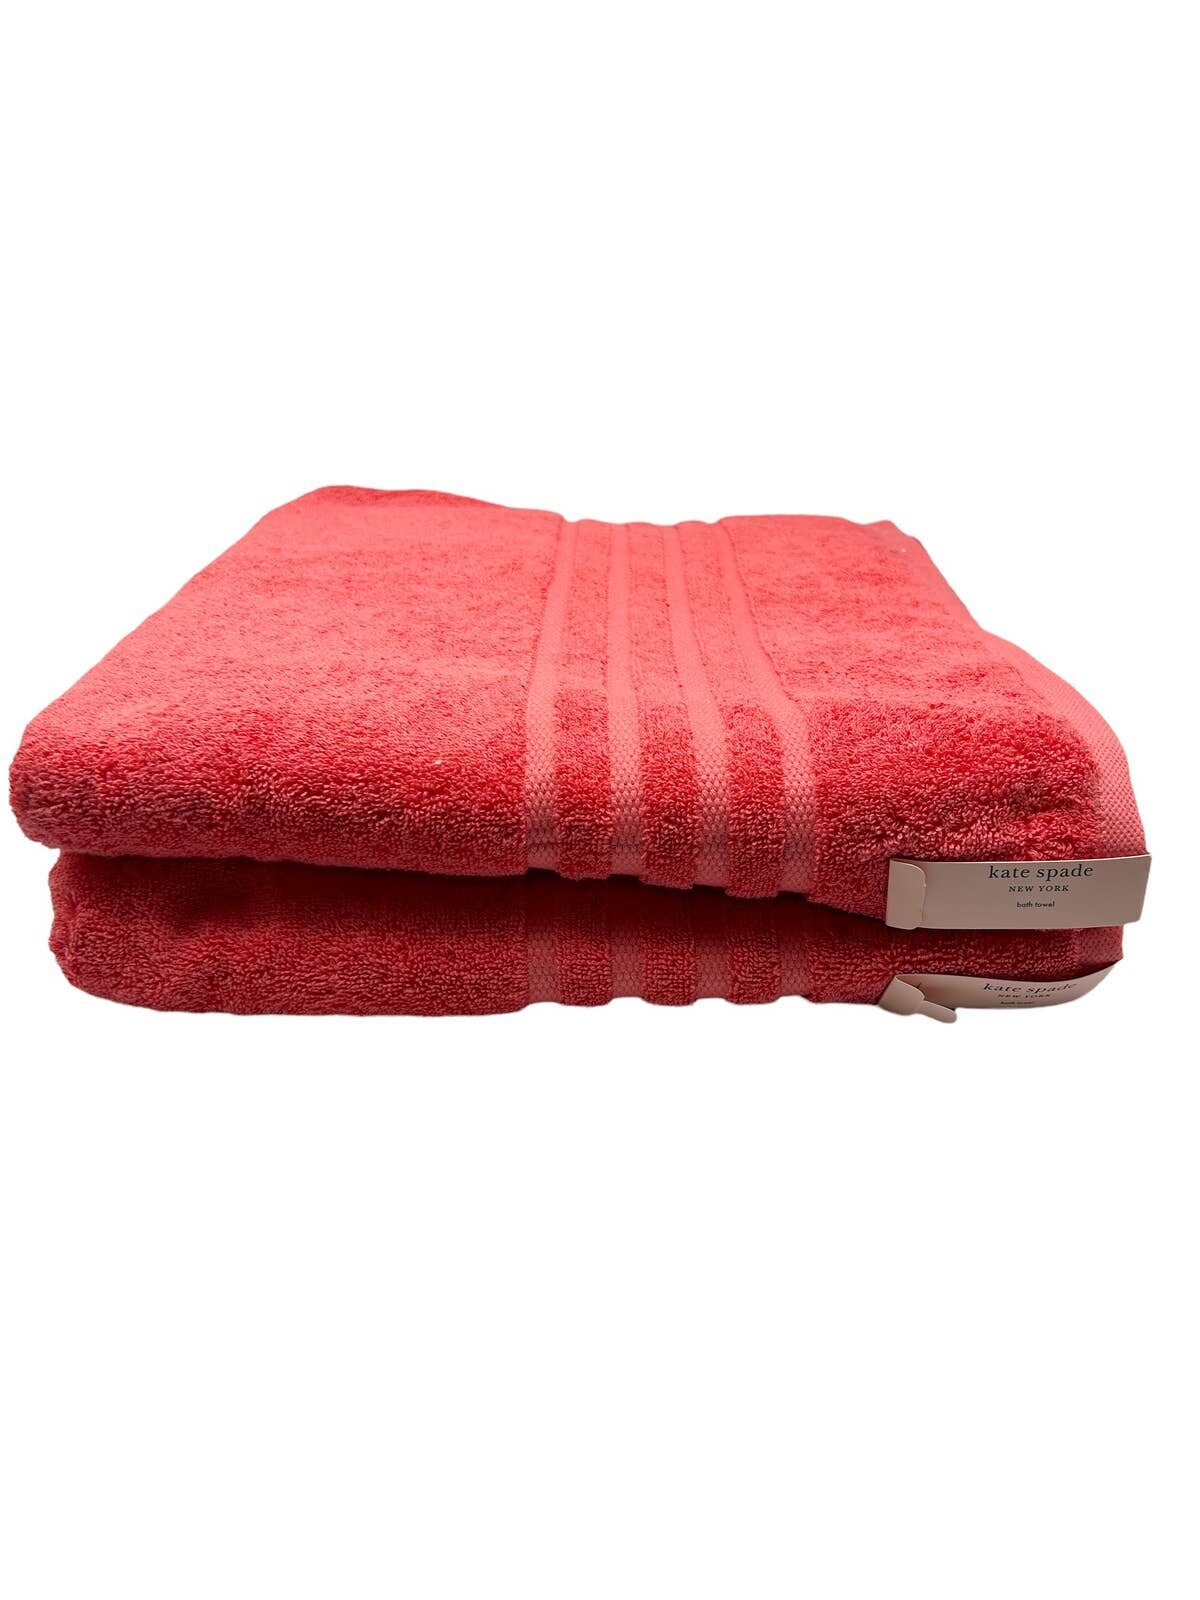 Kate Spade Bath Towels Set of Two - Etsy